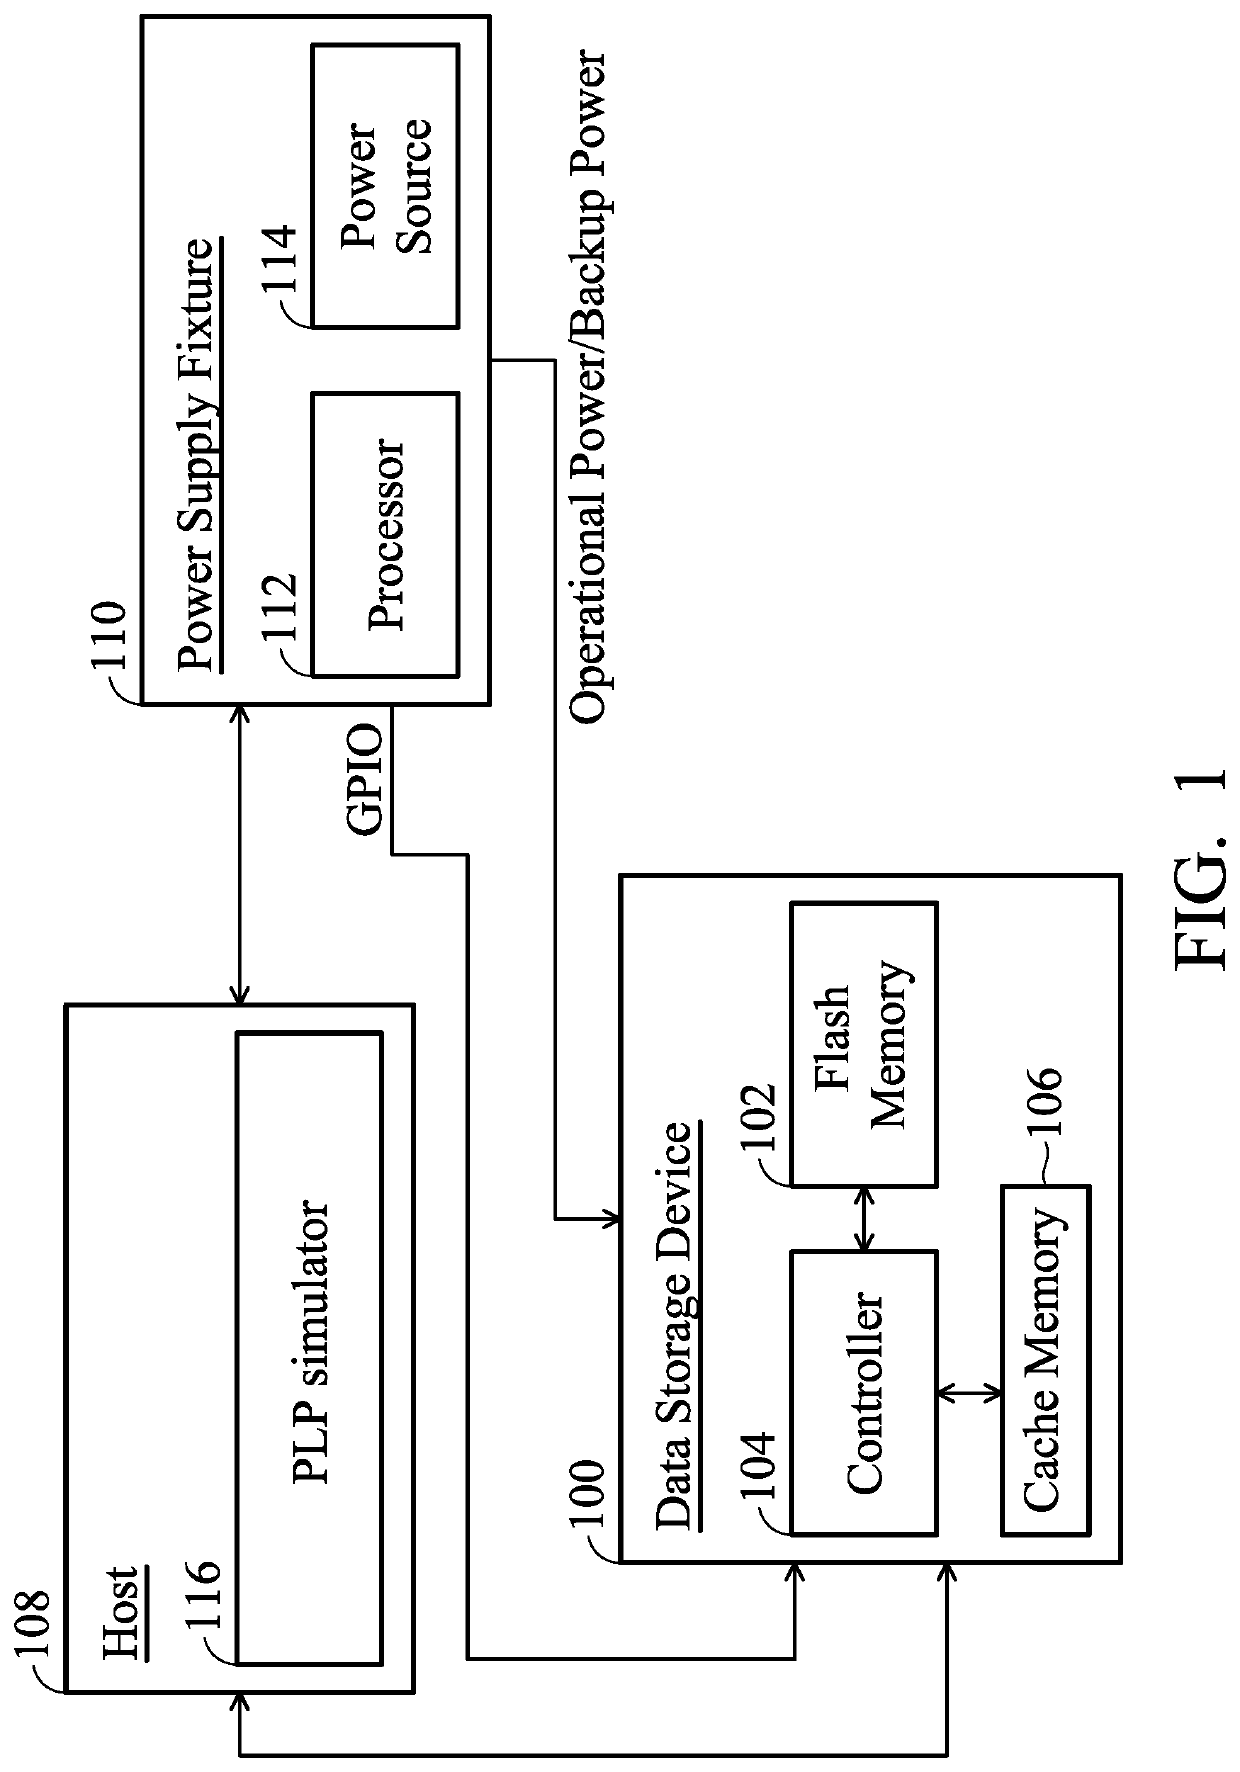 Development system and productization method for data storage device